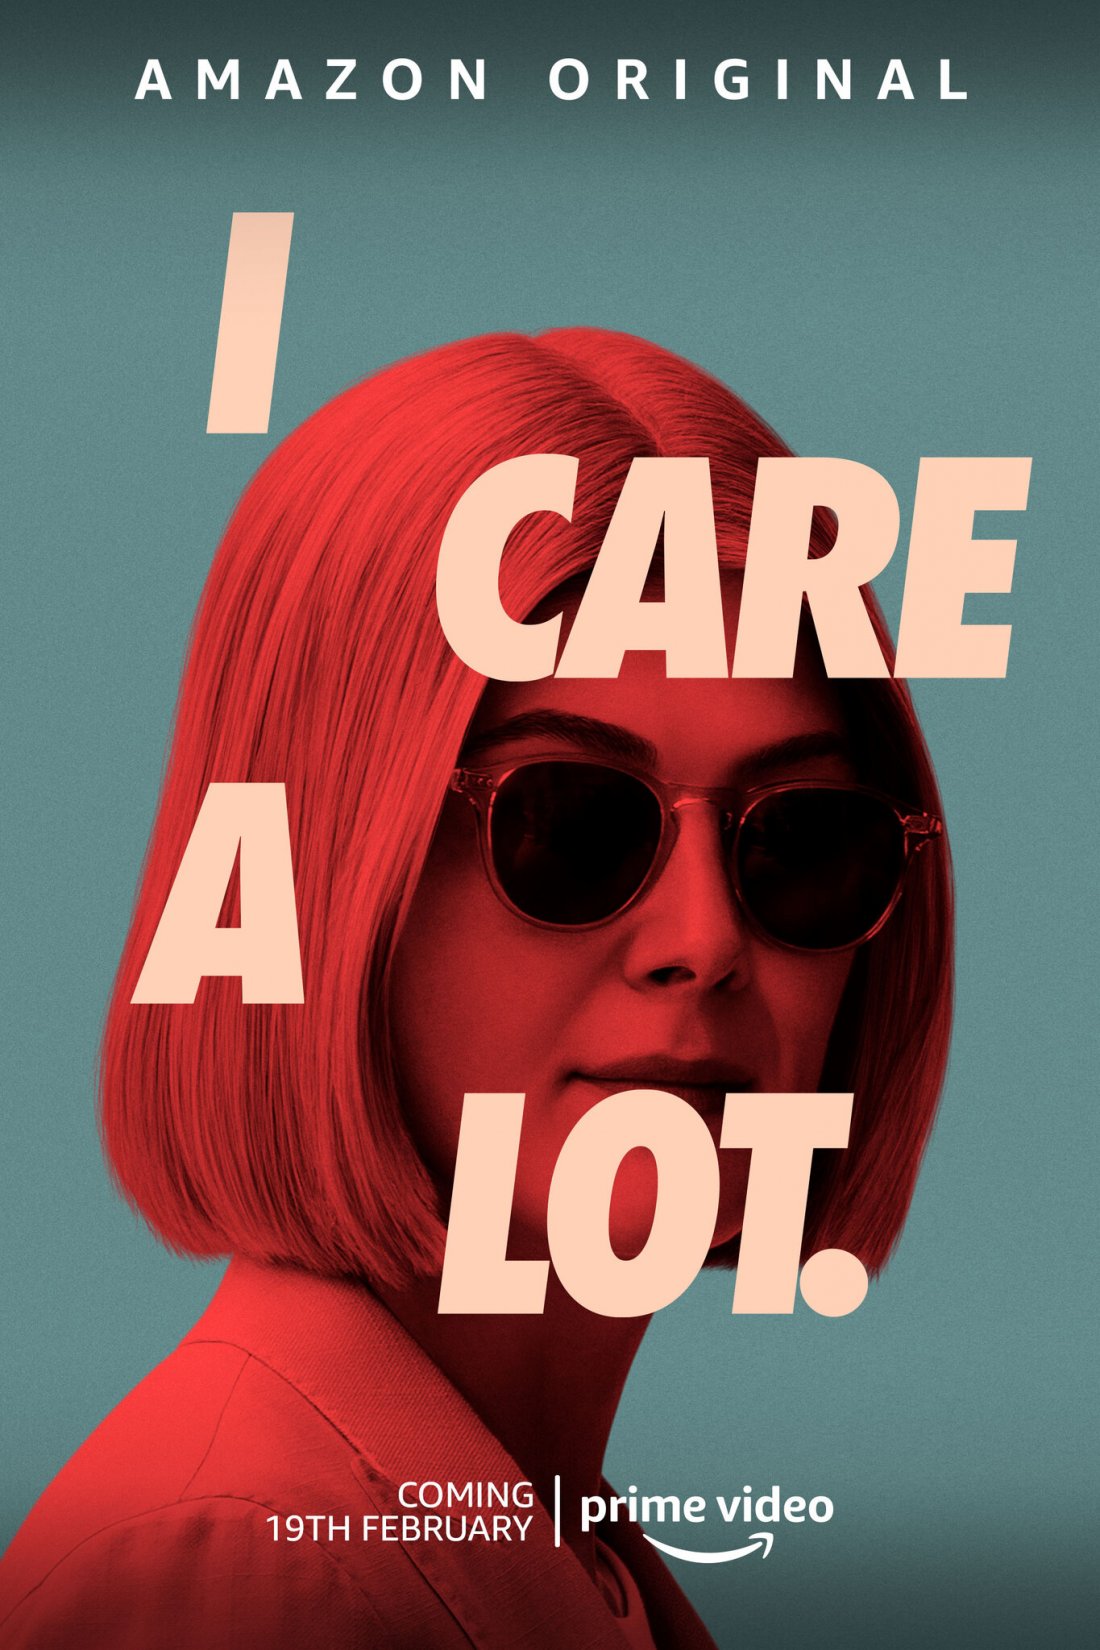 I Care A Lot Poster